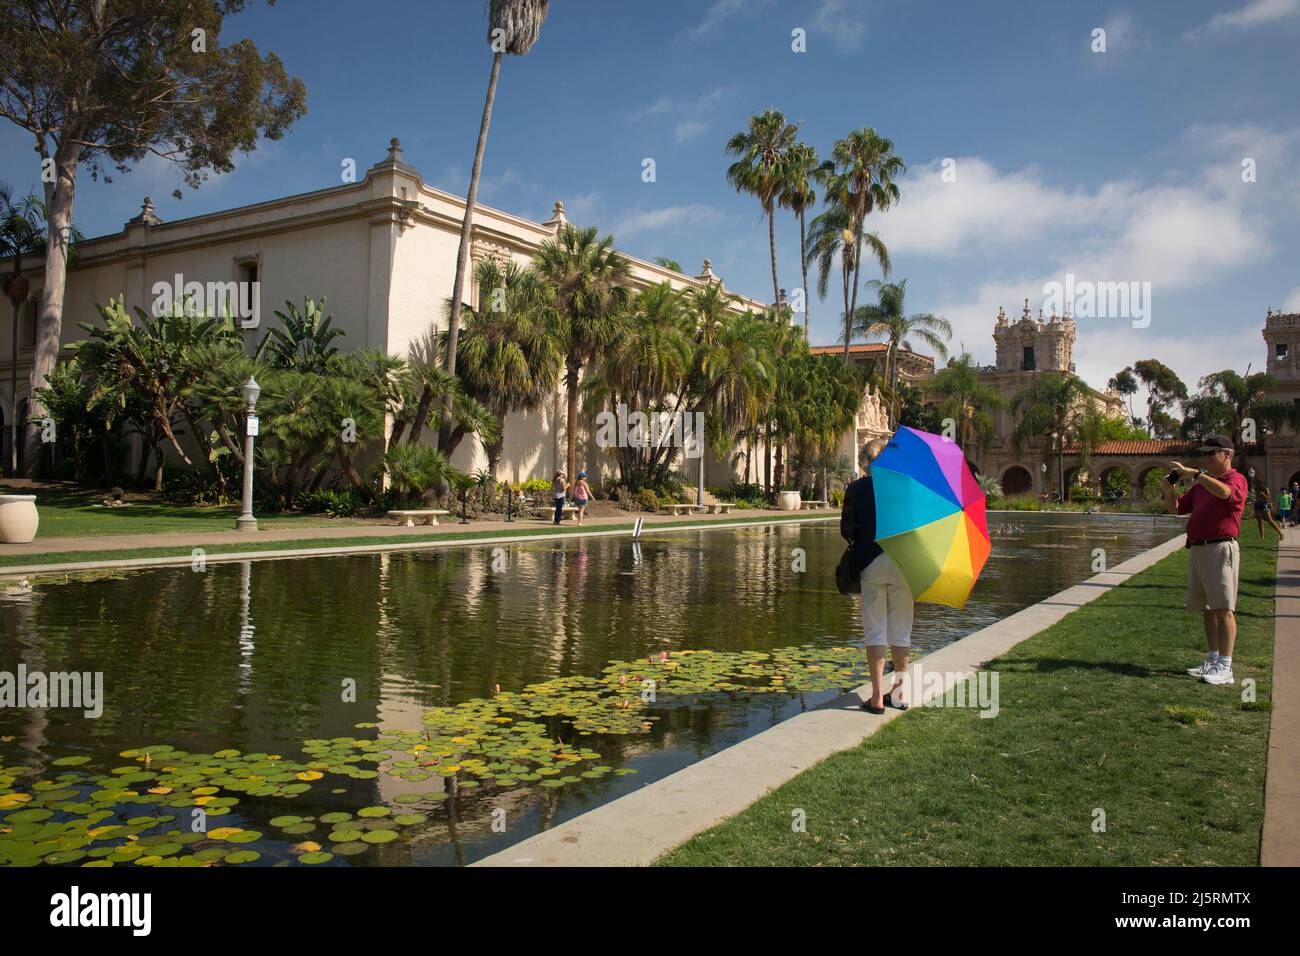 Tourist taking a photo of his wife with a colorful umbrella by the Balboa Park Lily Pond and Lagoon, San Diego Stock Photo